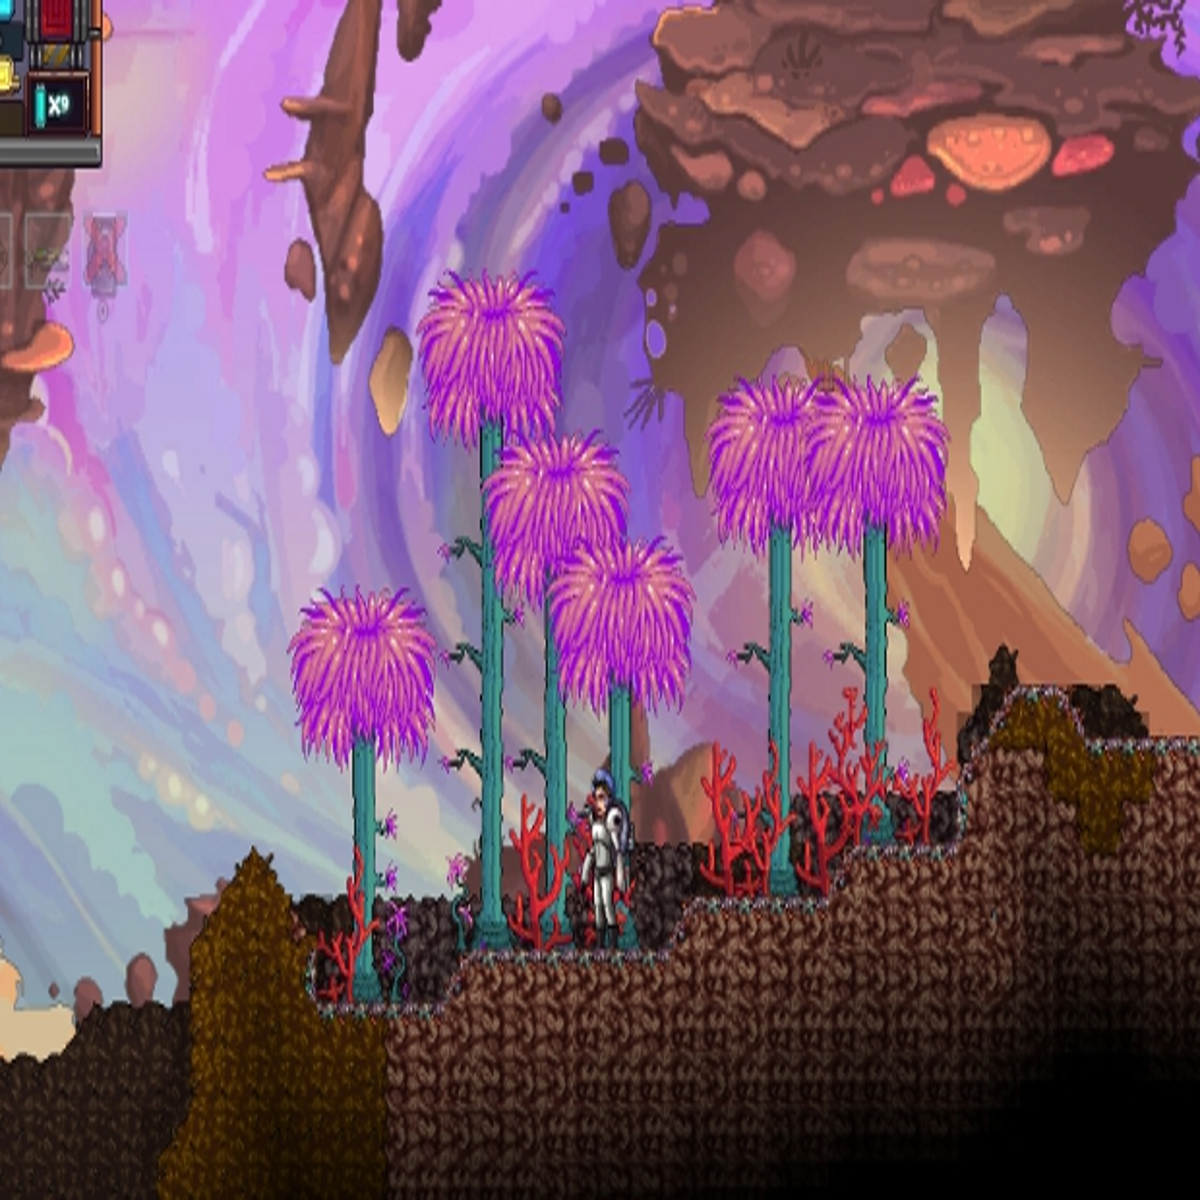 Terraria's devs have been trying to stop developing Terraria for